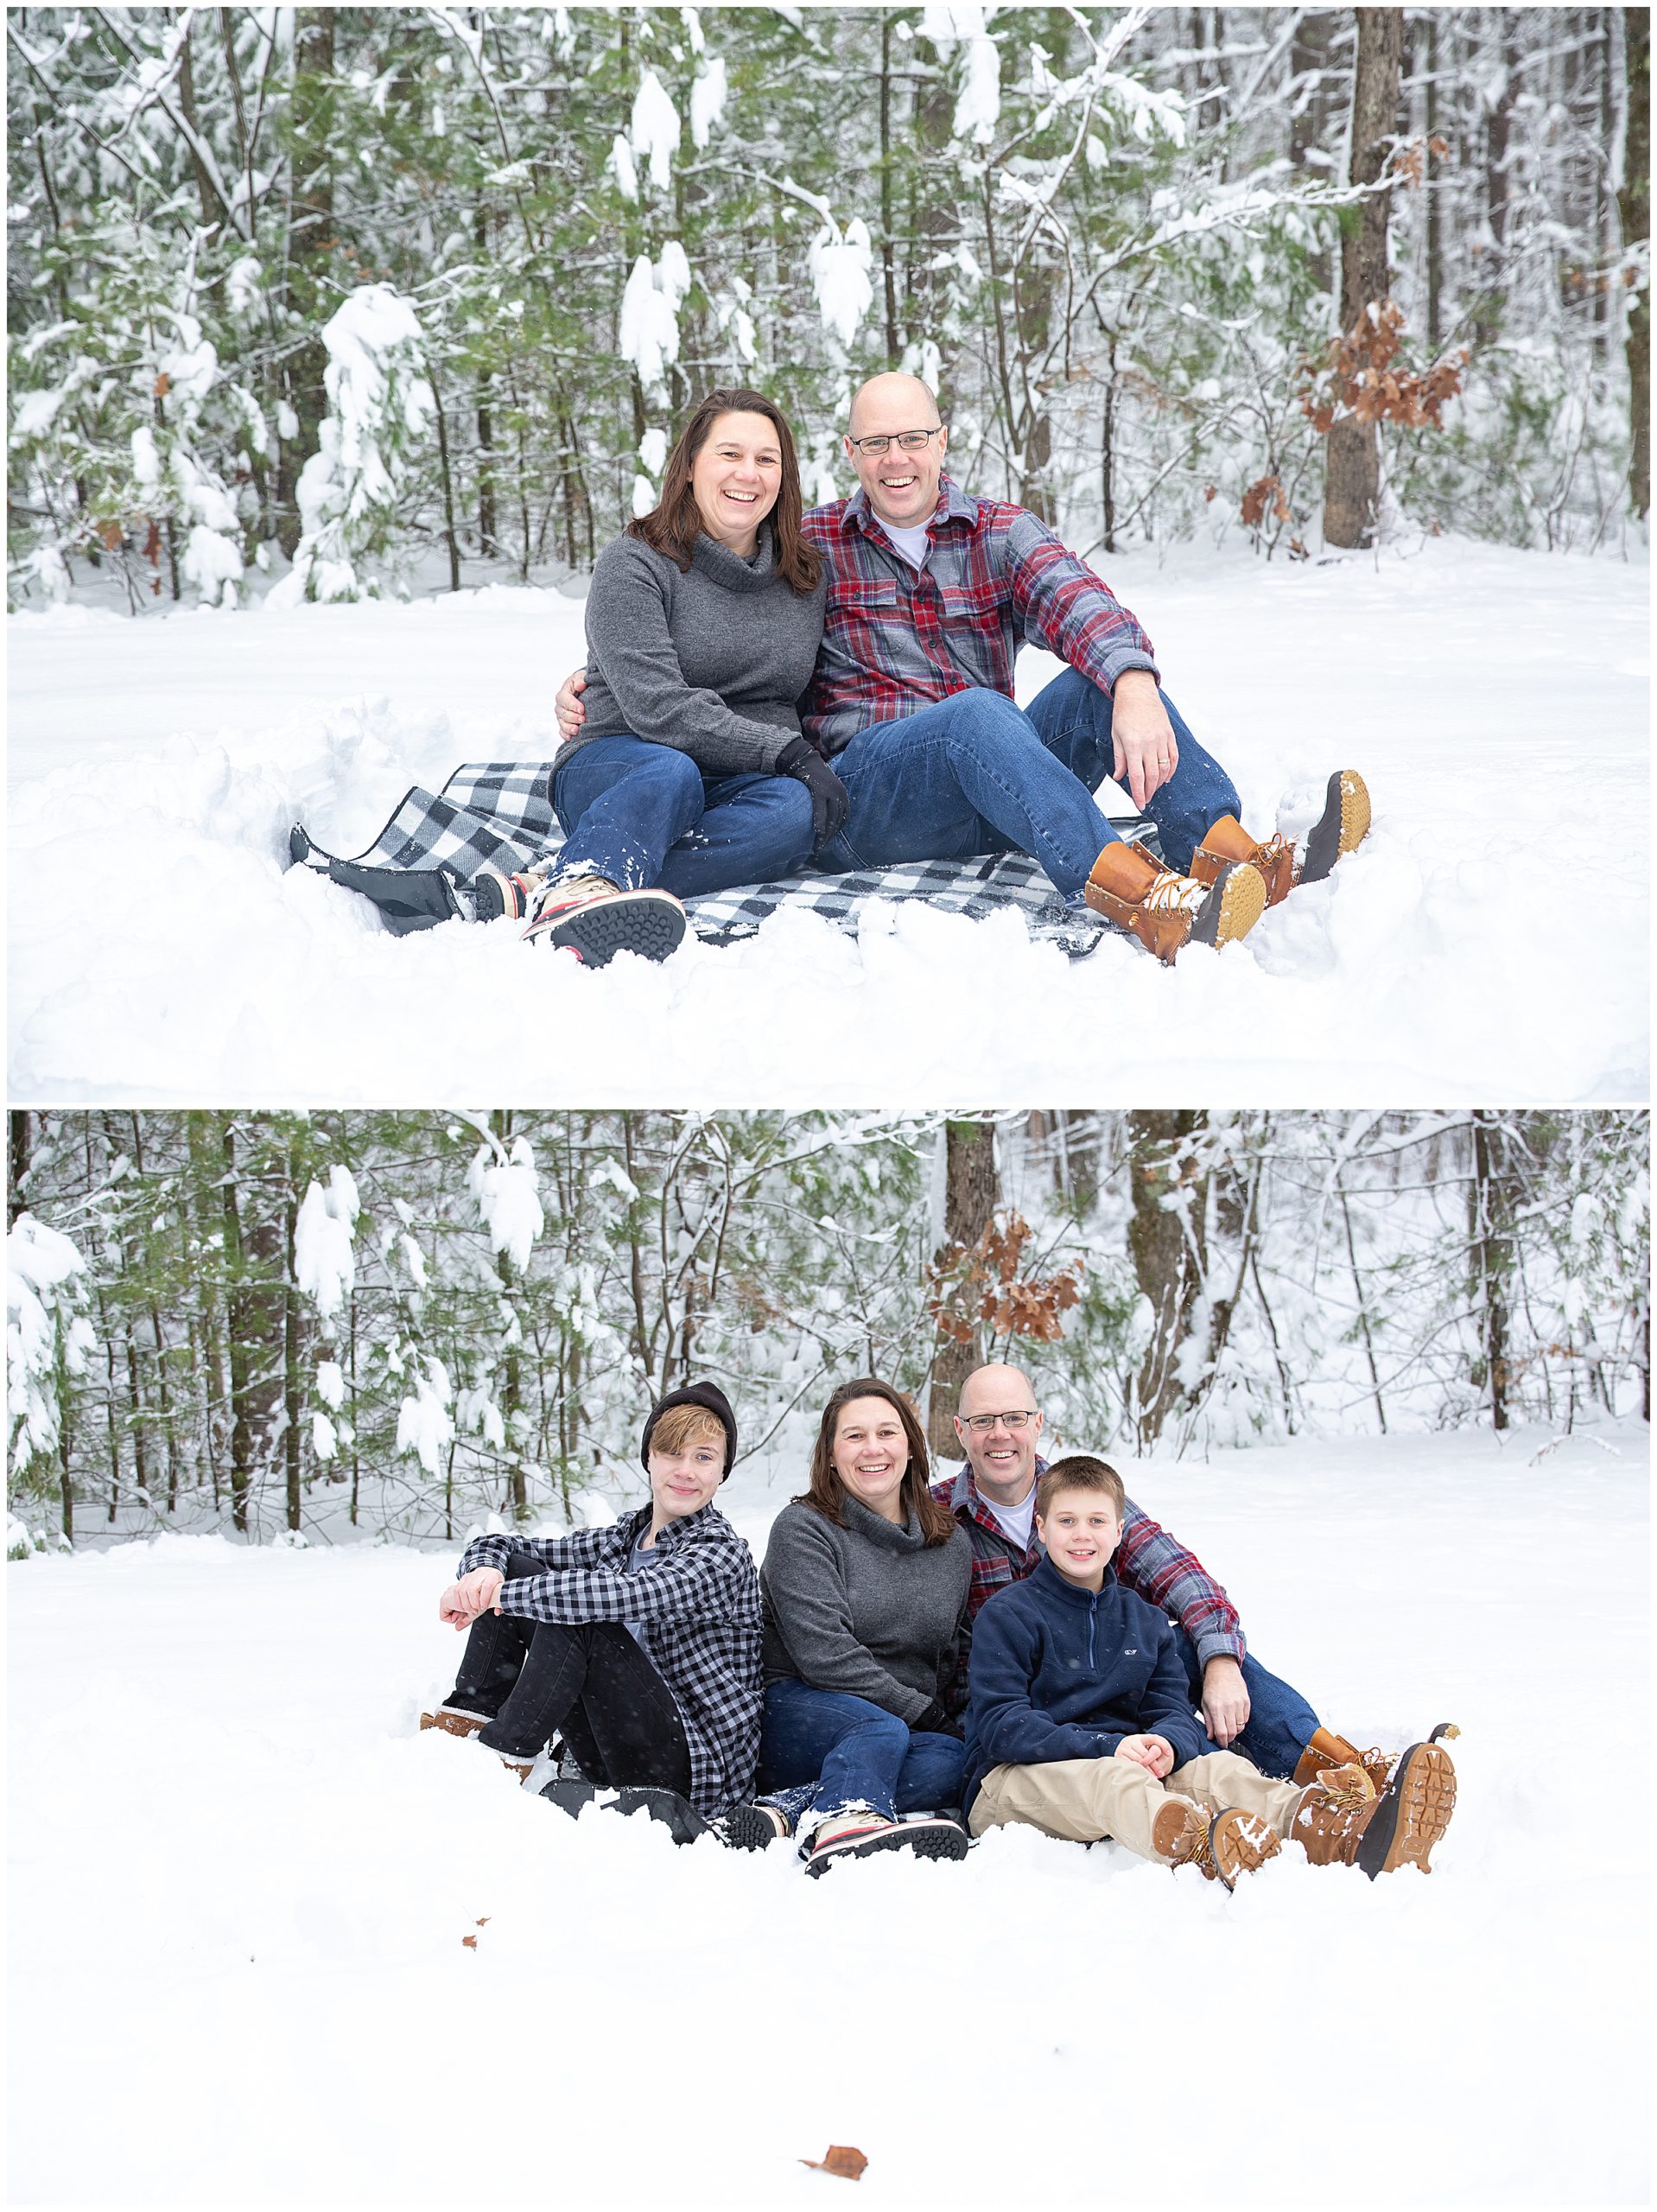 Sitting in the snow for portraits